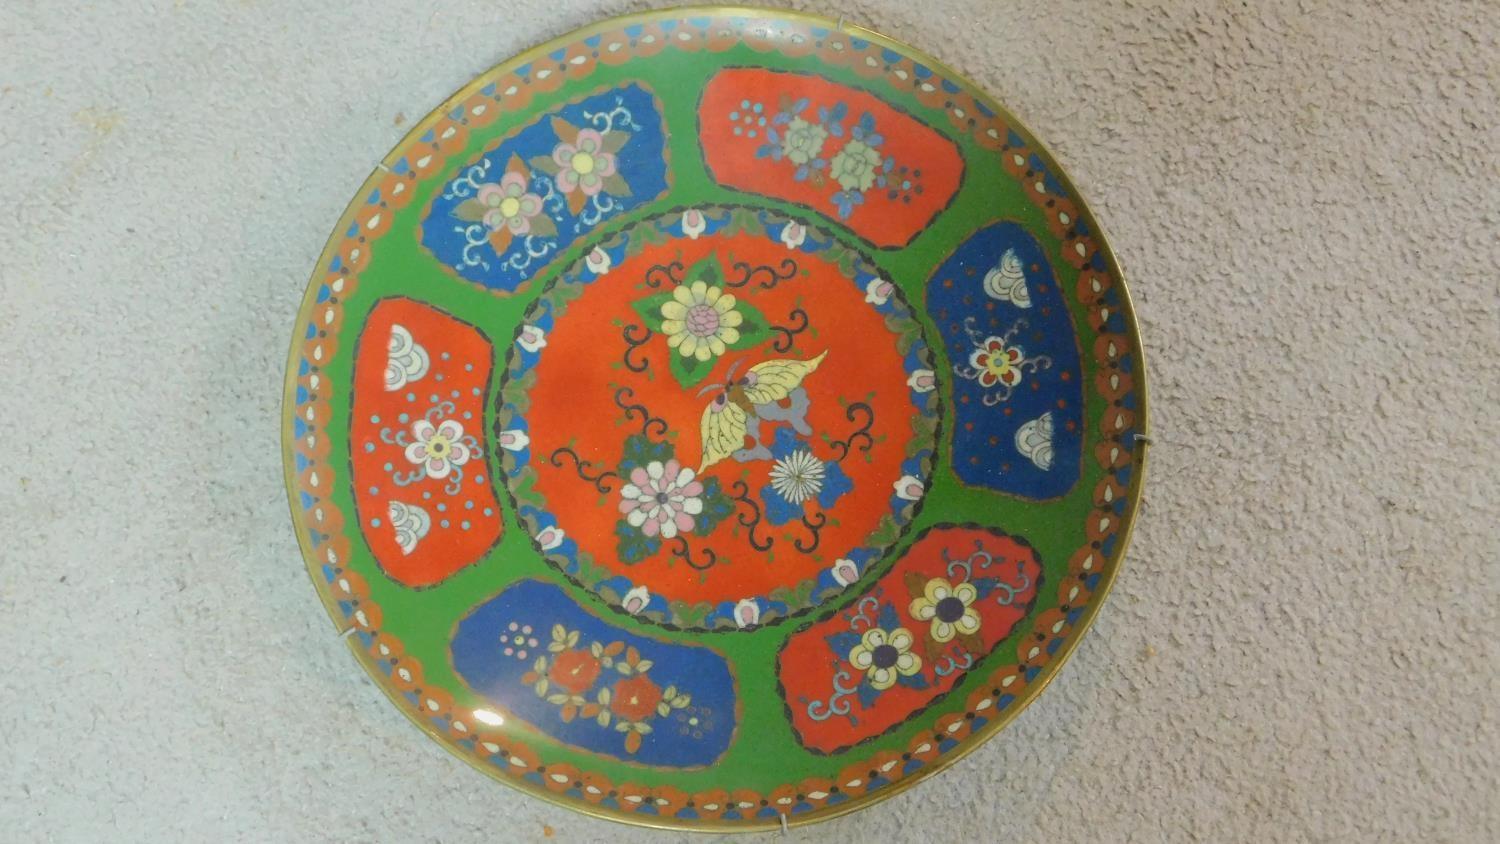 A Meji period Cloisonné enamel plate with red and blue panels on a green background decorated with - Image 2 of 5